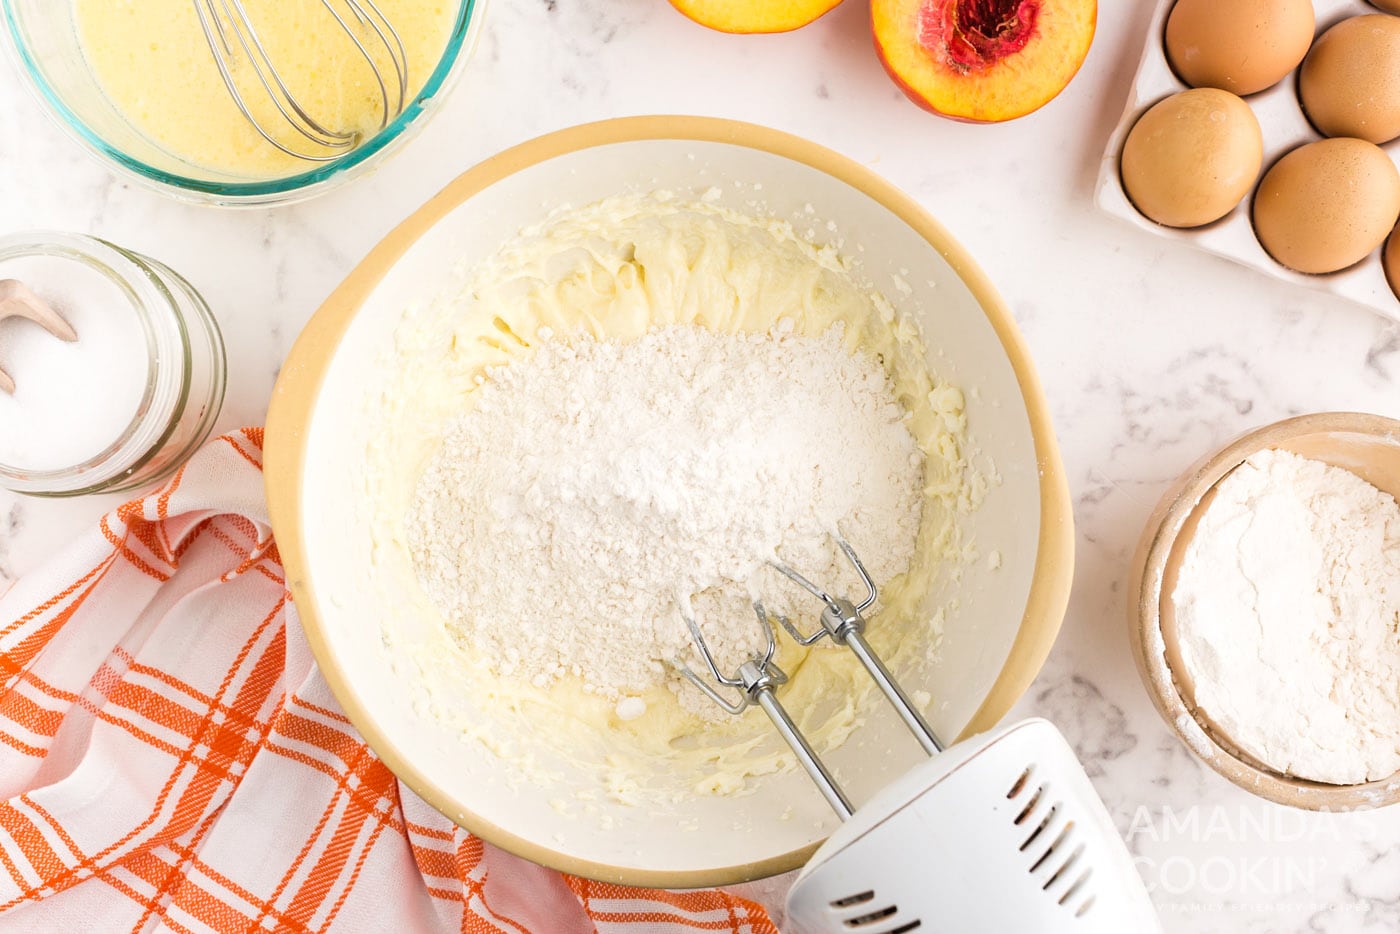 dry ingredients in a bowl for cake batter